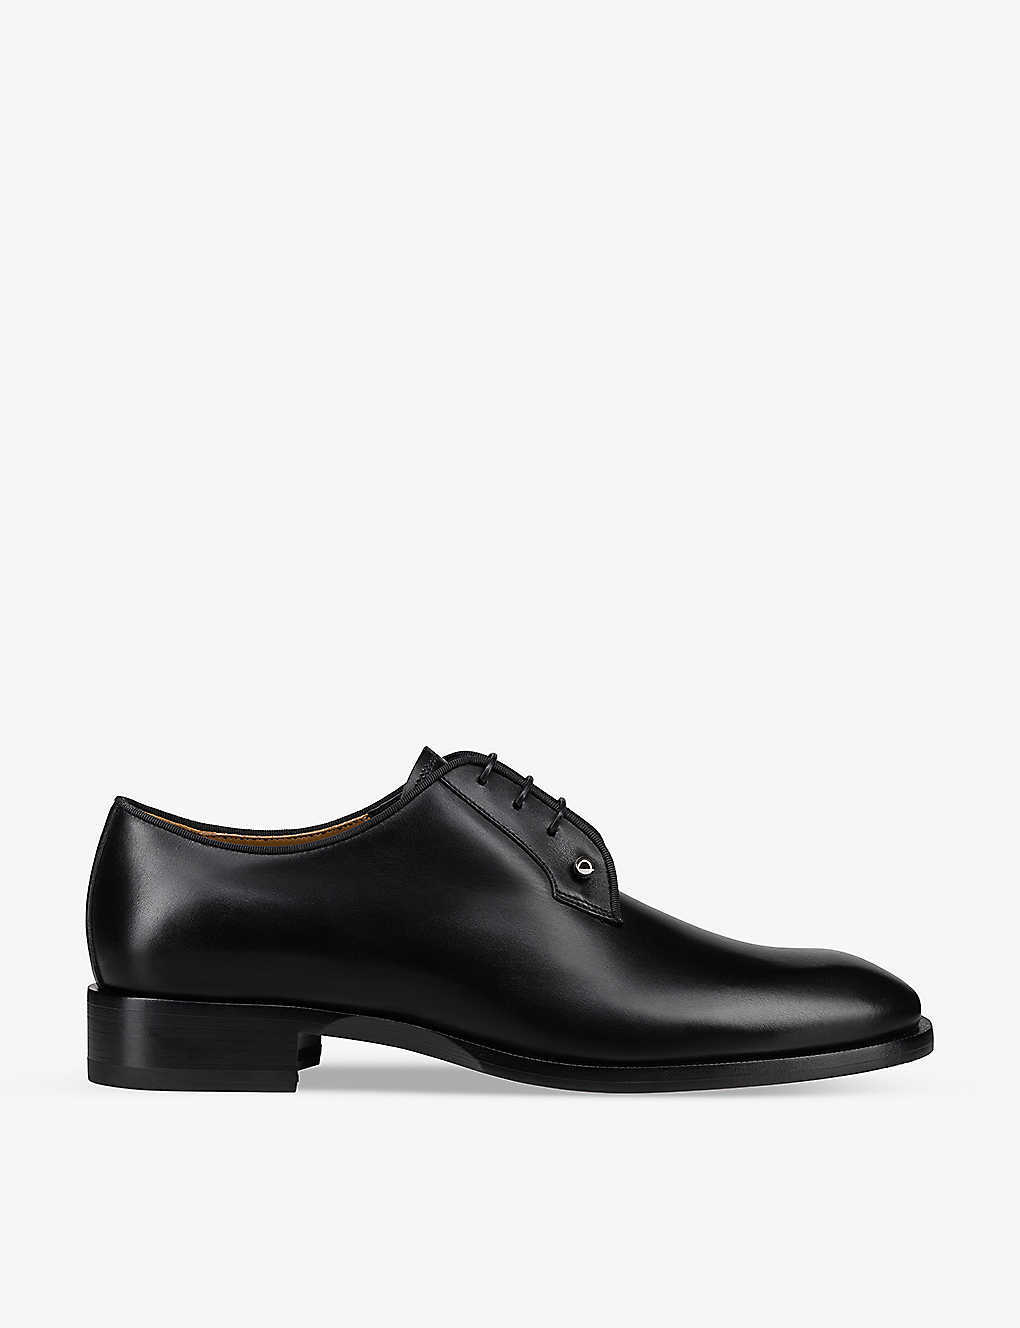 Shop Christian Louboutin Womens Black Chambeliss Leather Derby Shoes